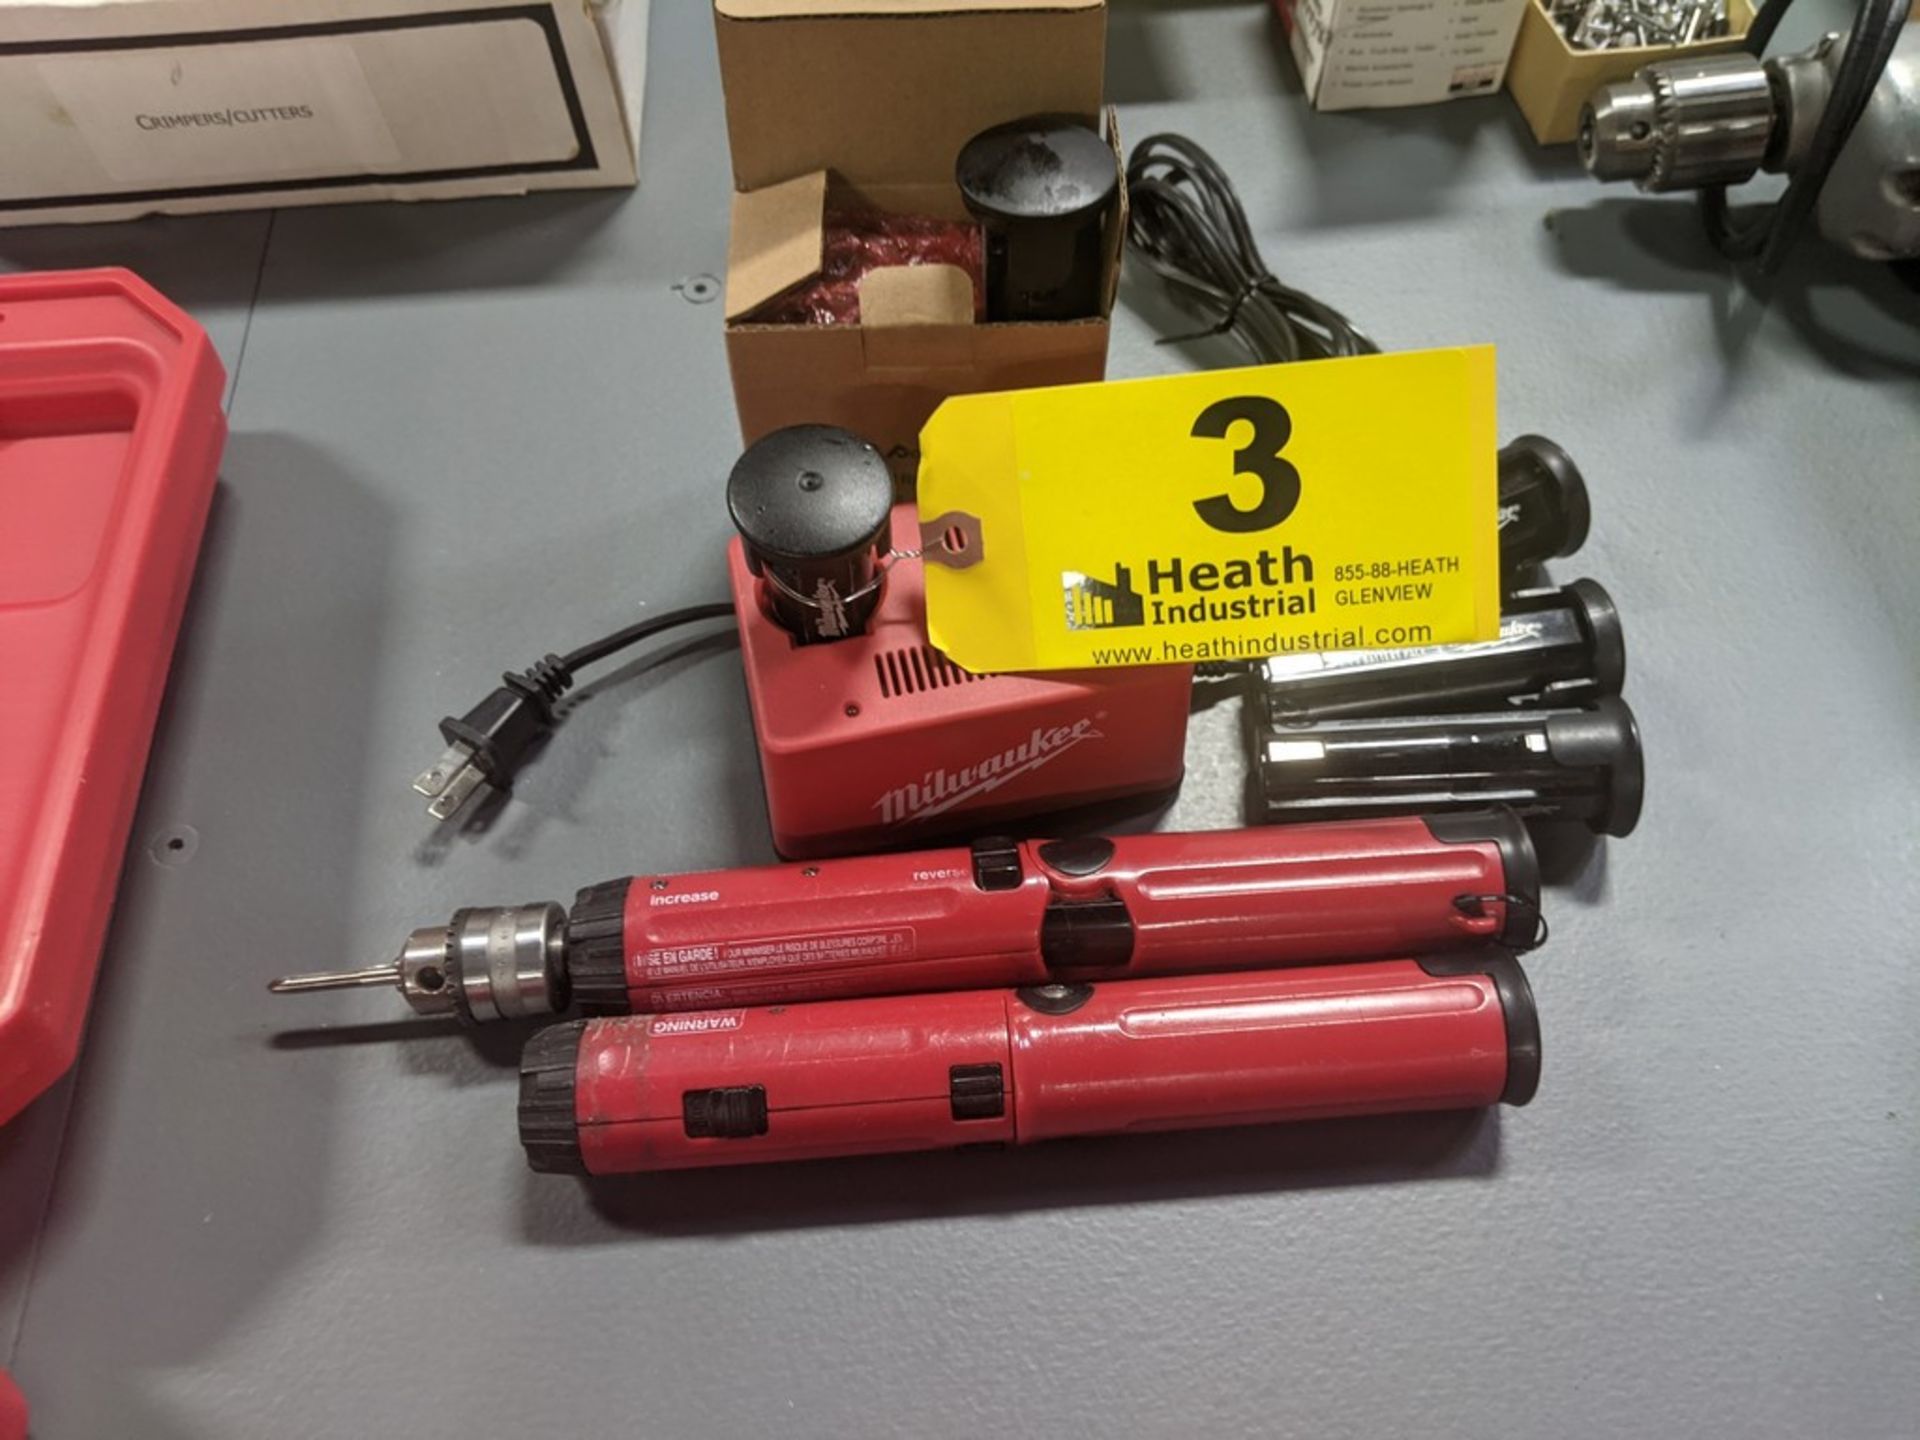 MILWAUKEE SCREWDIRVERS WITH CHARGER & BATTERIES